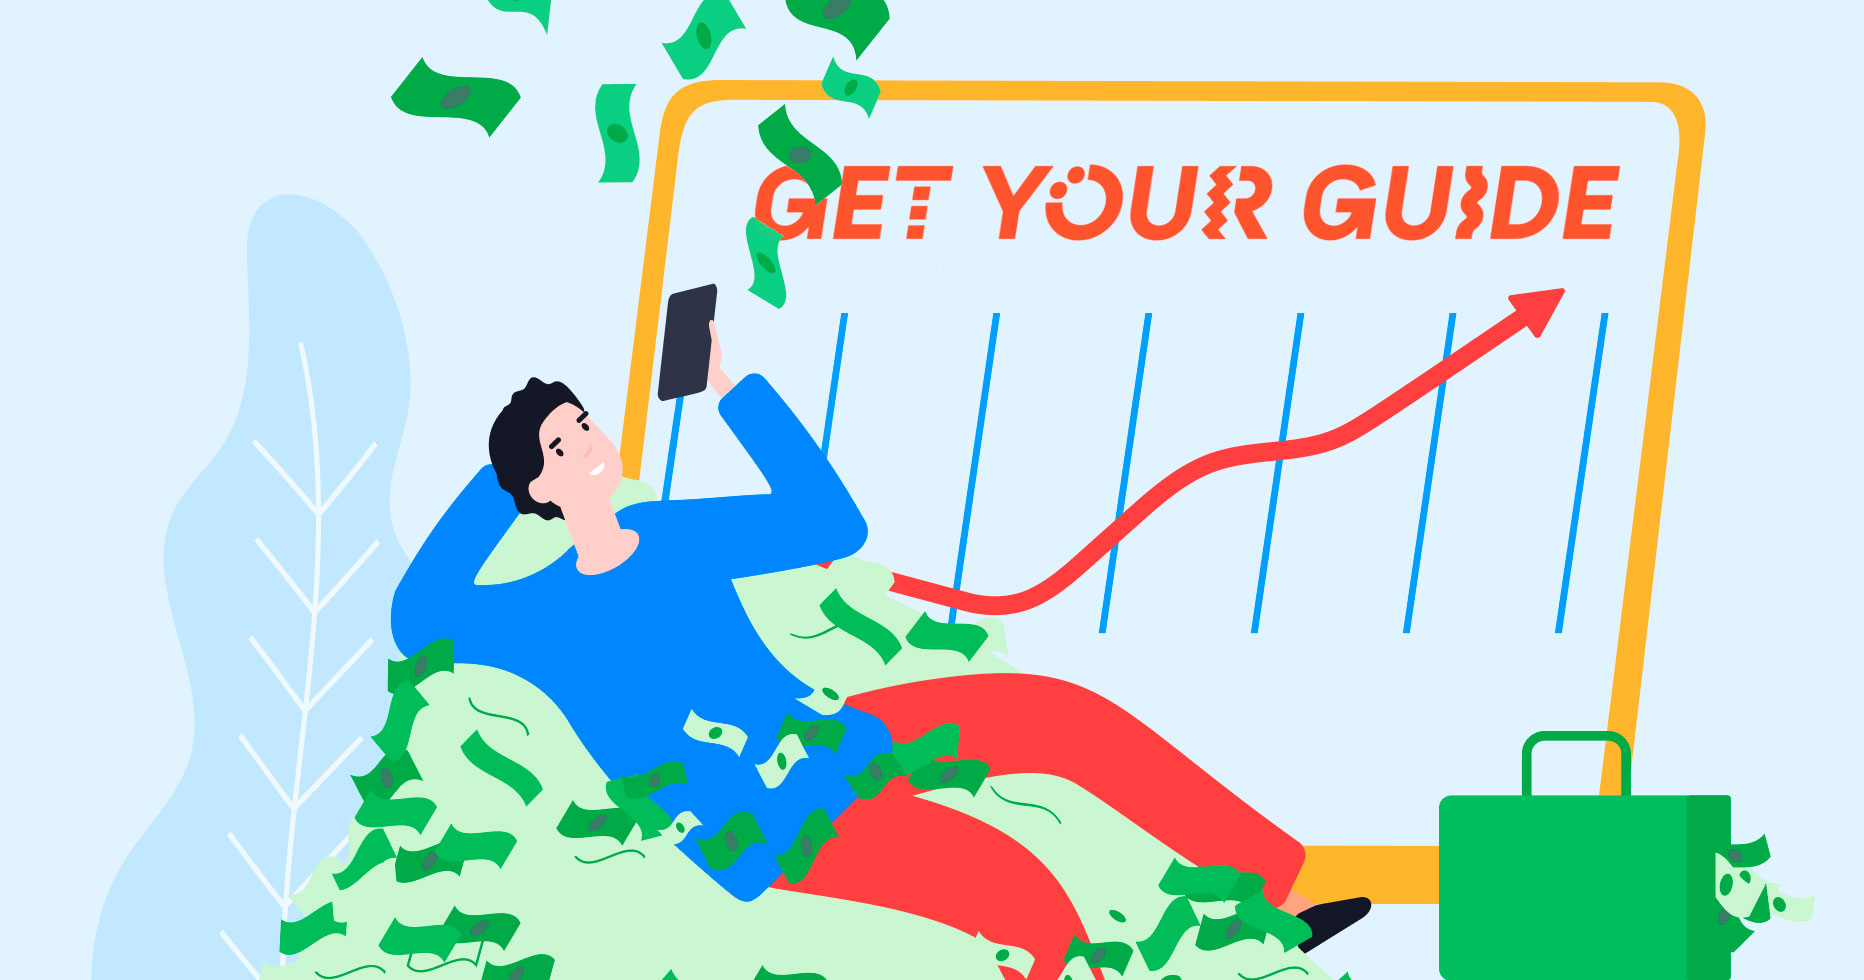 GetYourGuide increases commission for 3 months